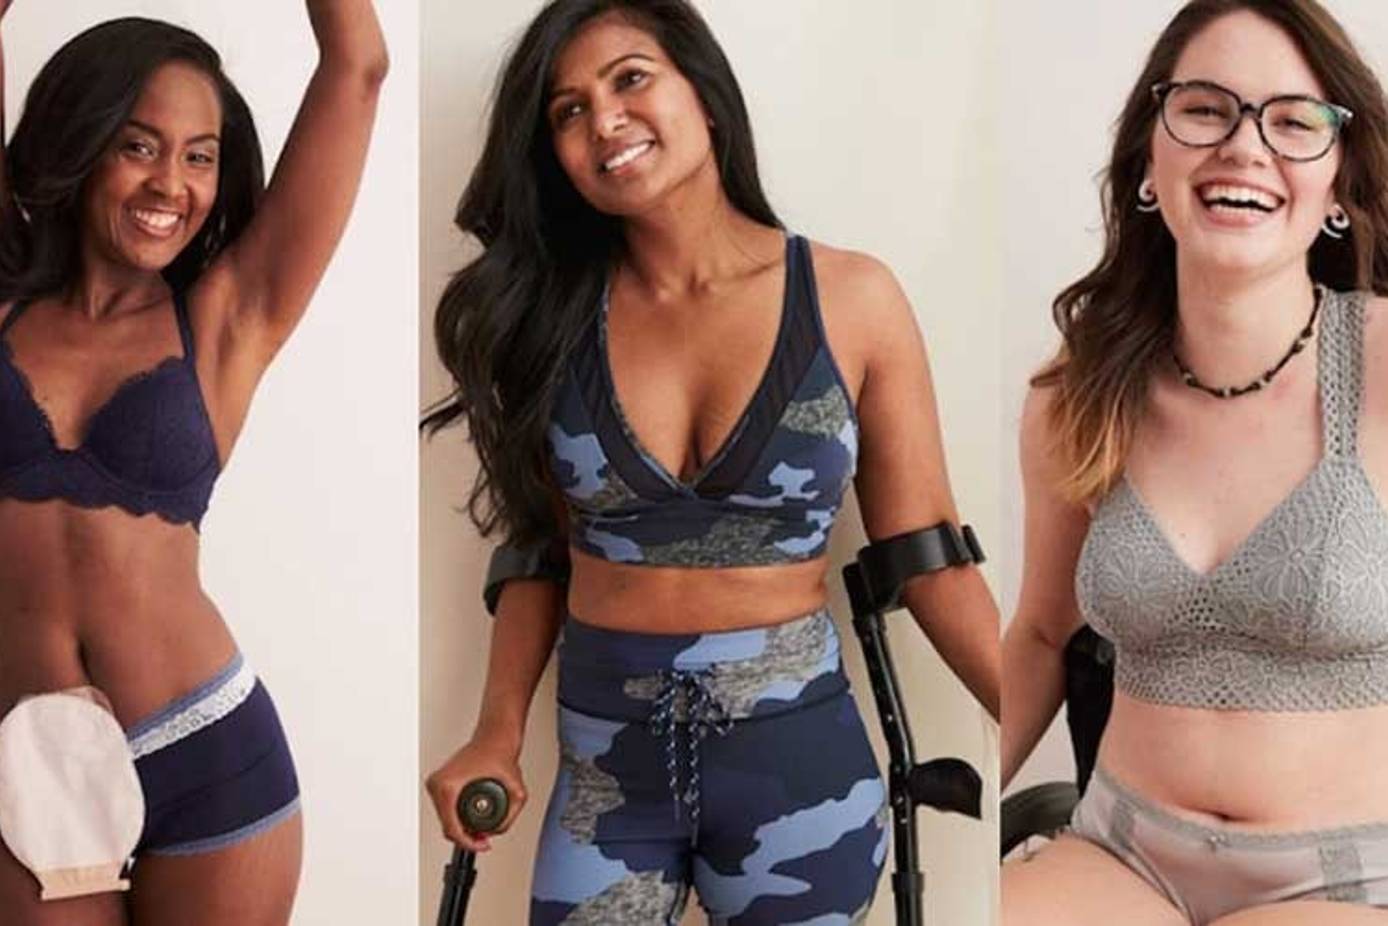 Aerie Celebrates Body Empowerment With Real Women